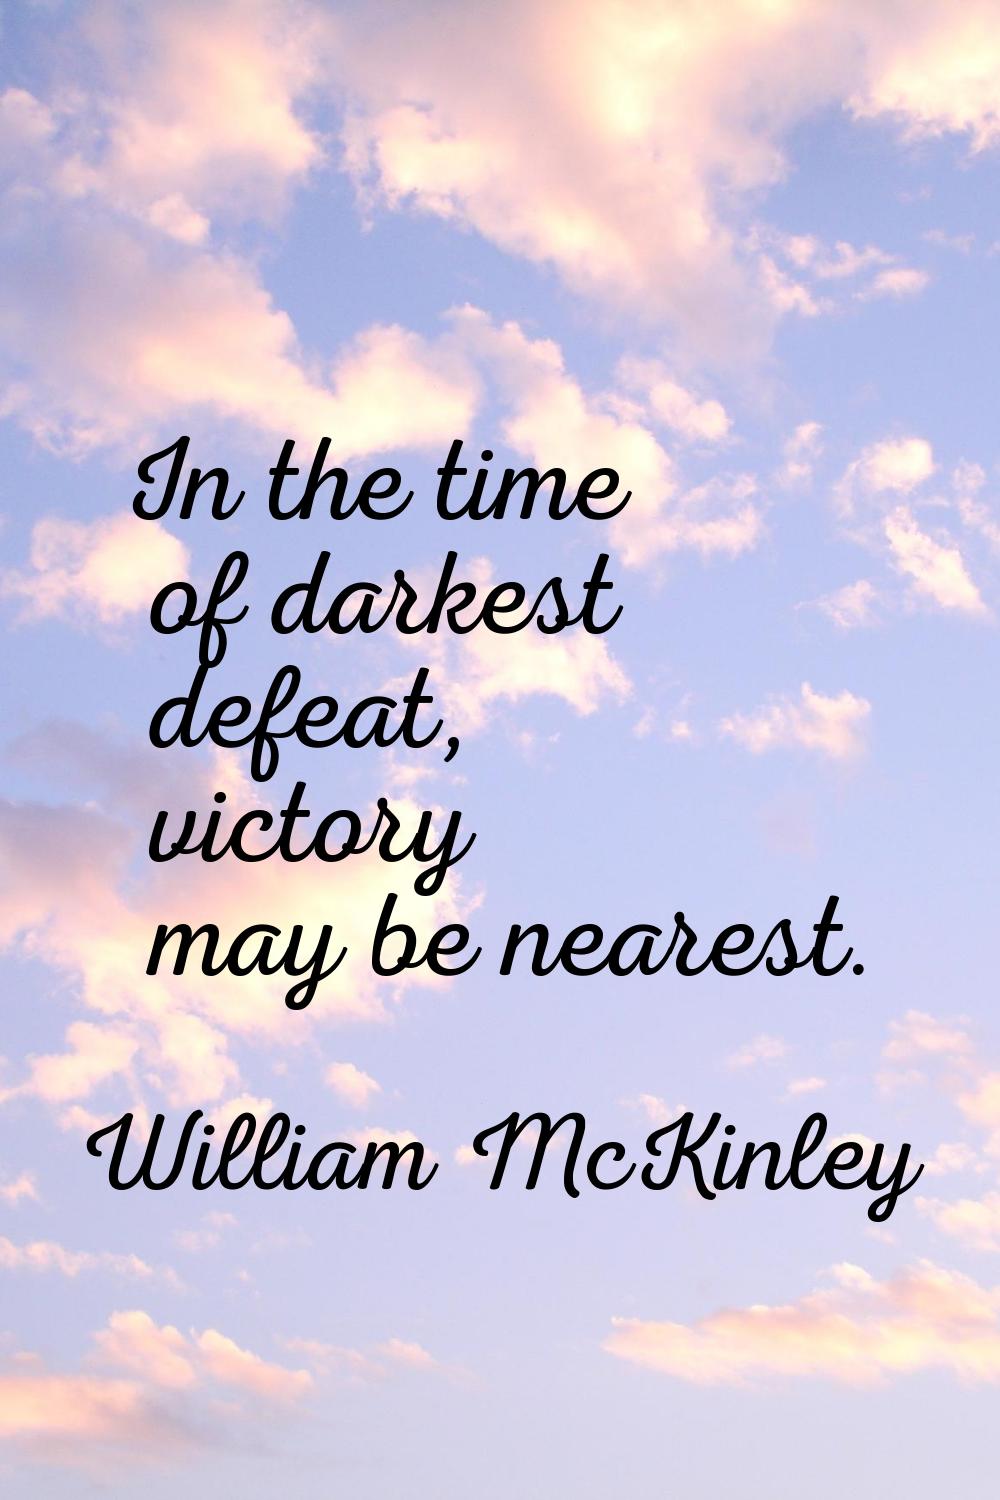 In the time of darkest defeat, victory may be nearest.